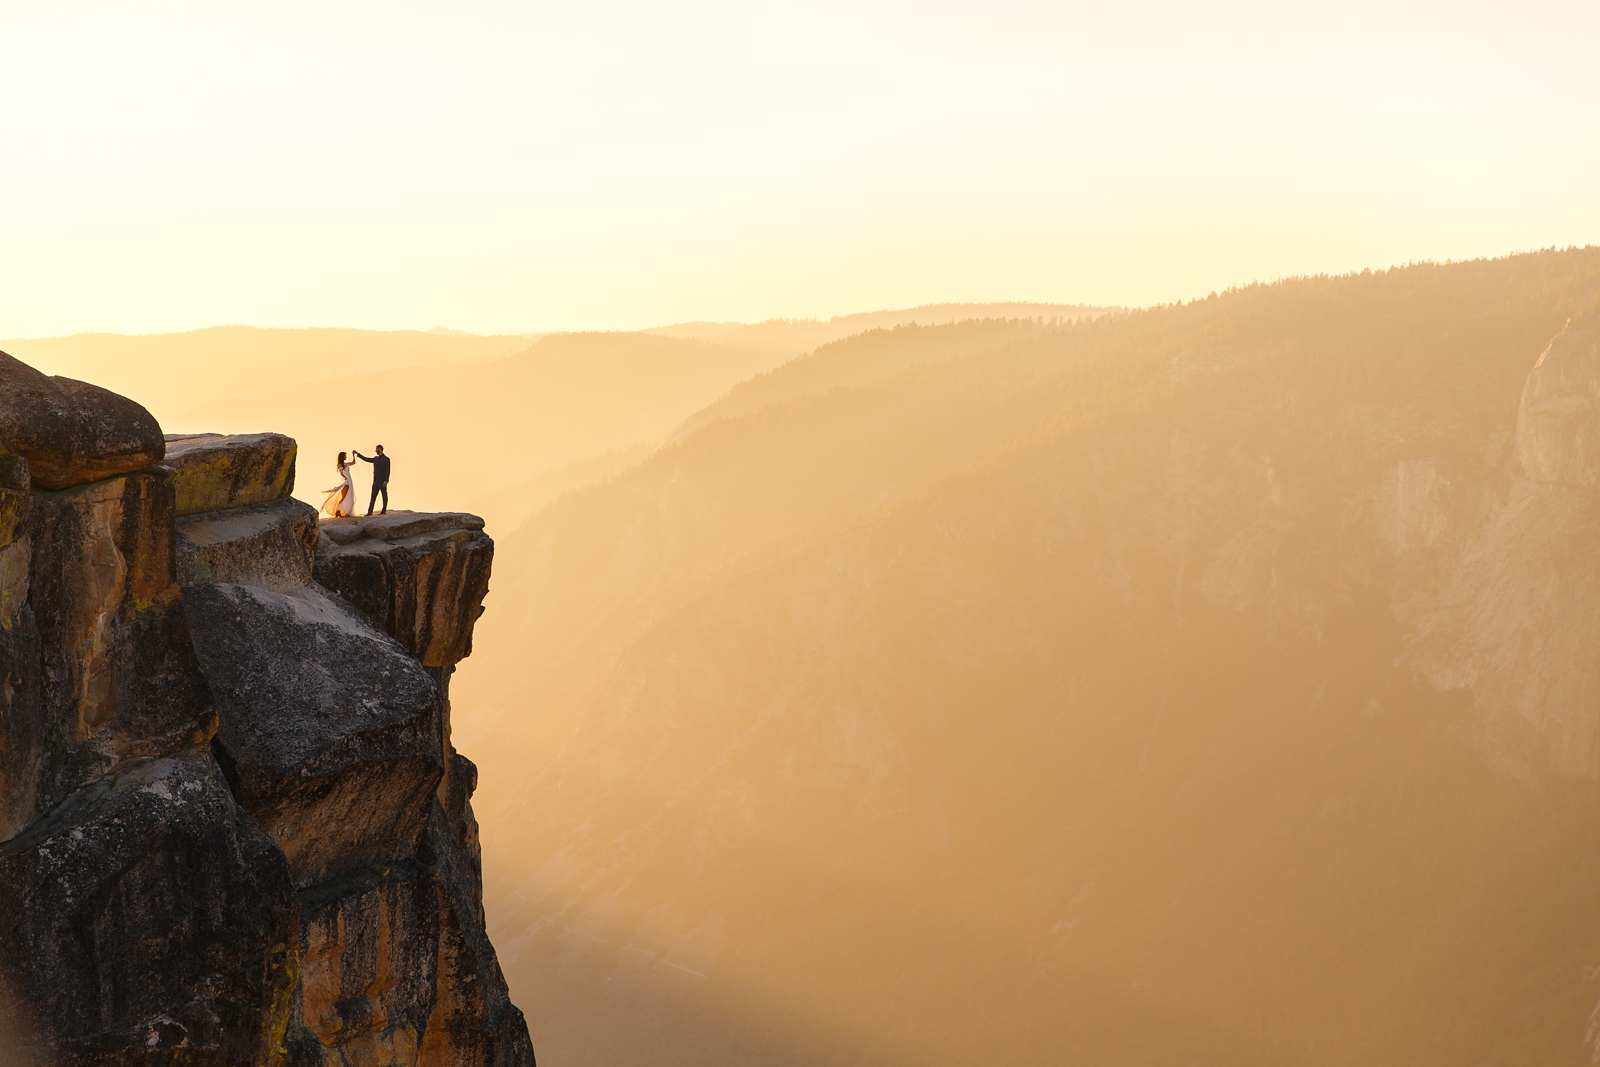 Bride and groom dancing on the edge of a cliff in Yosemite.